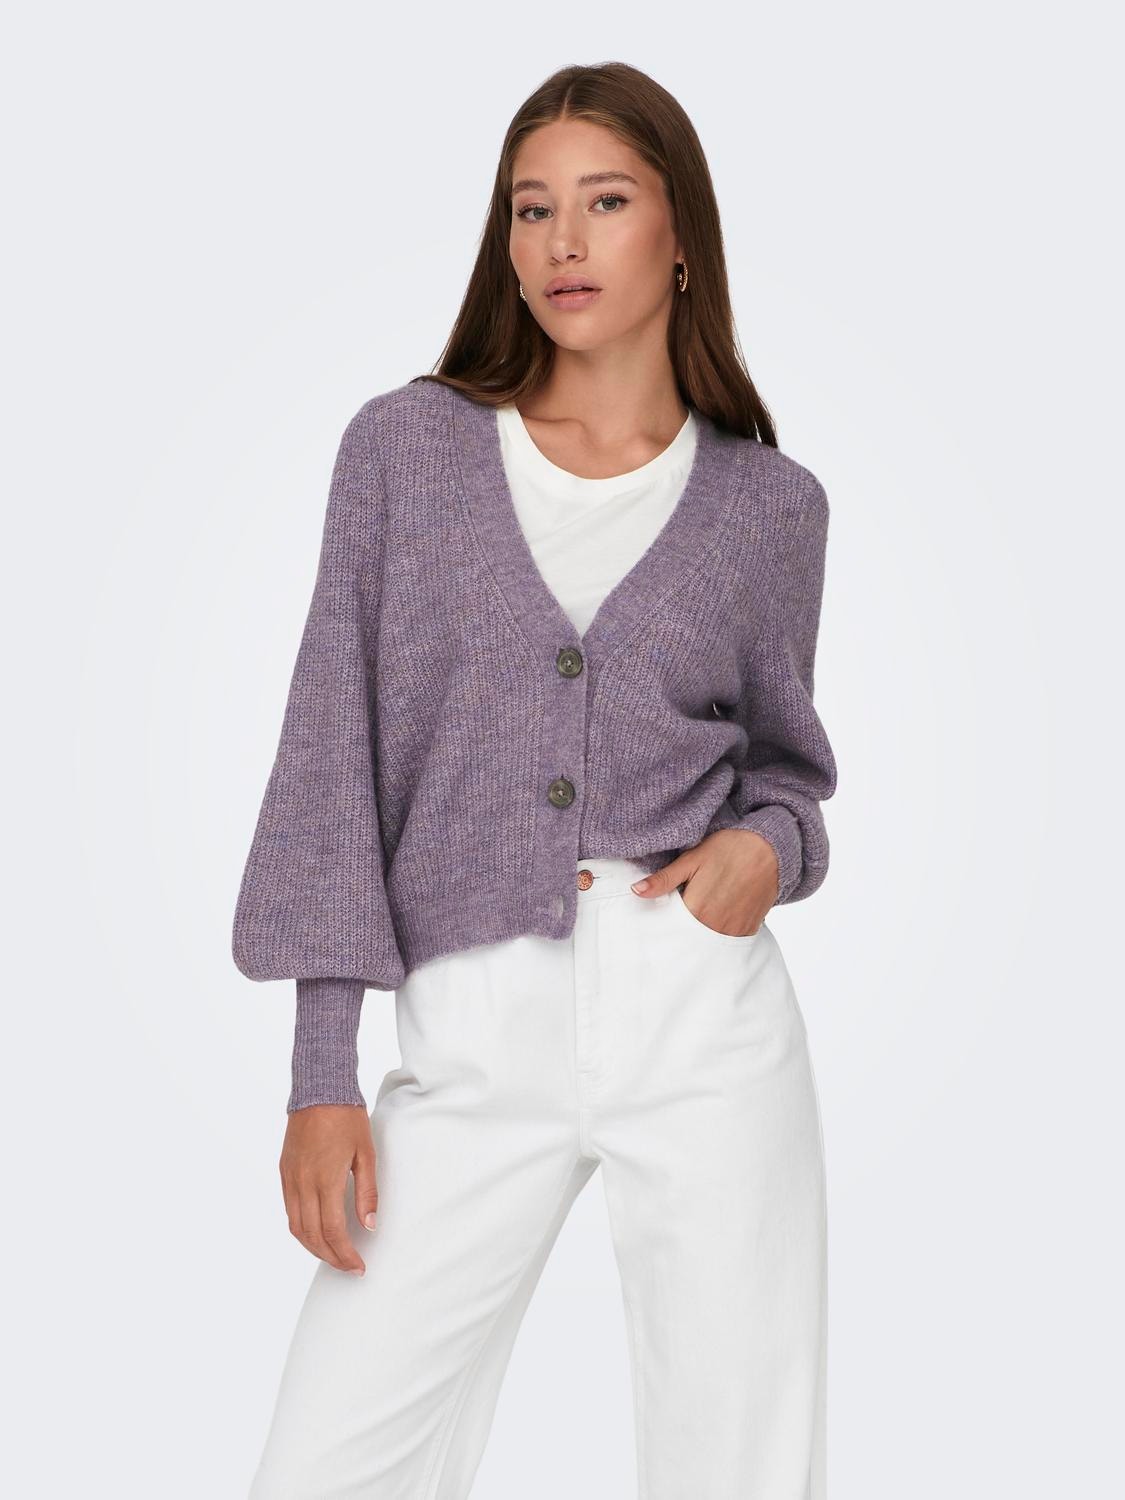 ONLY Rib Knitted Cardigan -Lavender Gray - 15223312